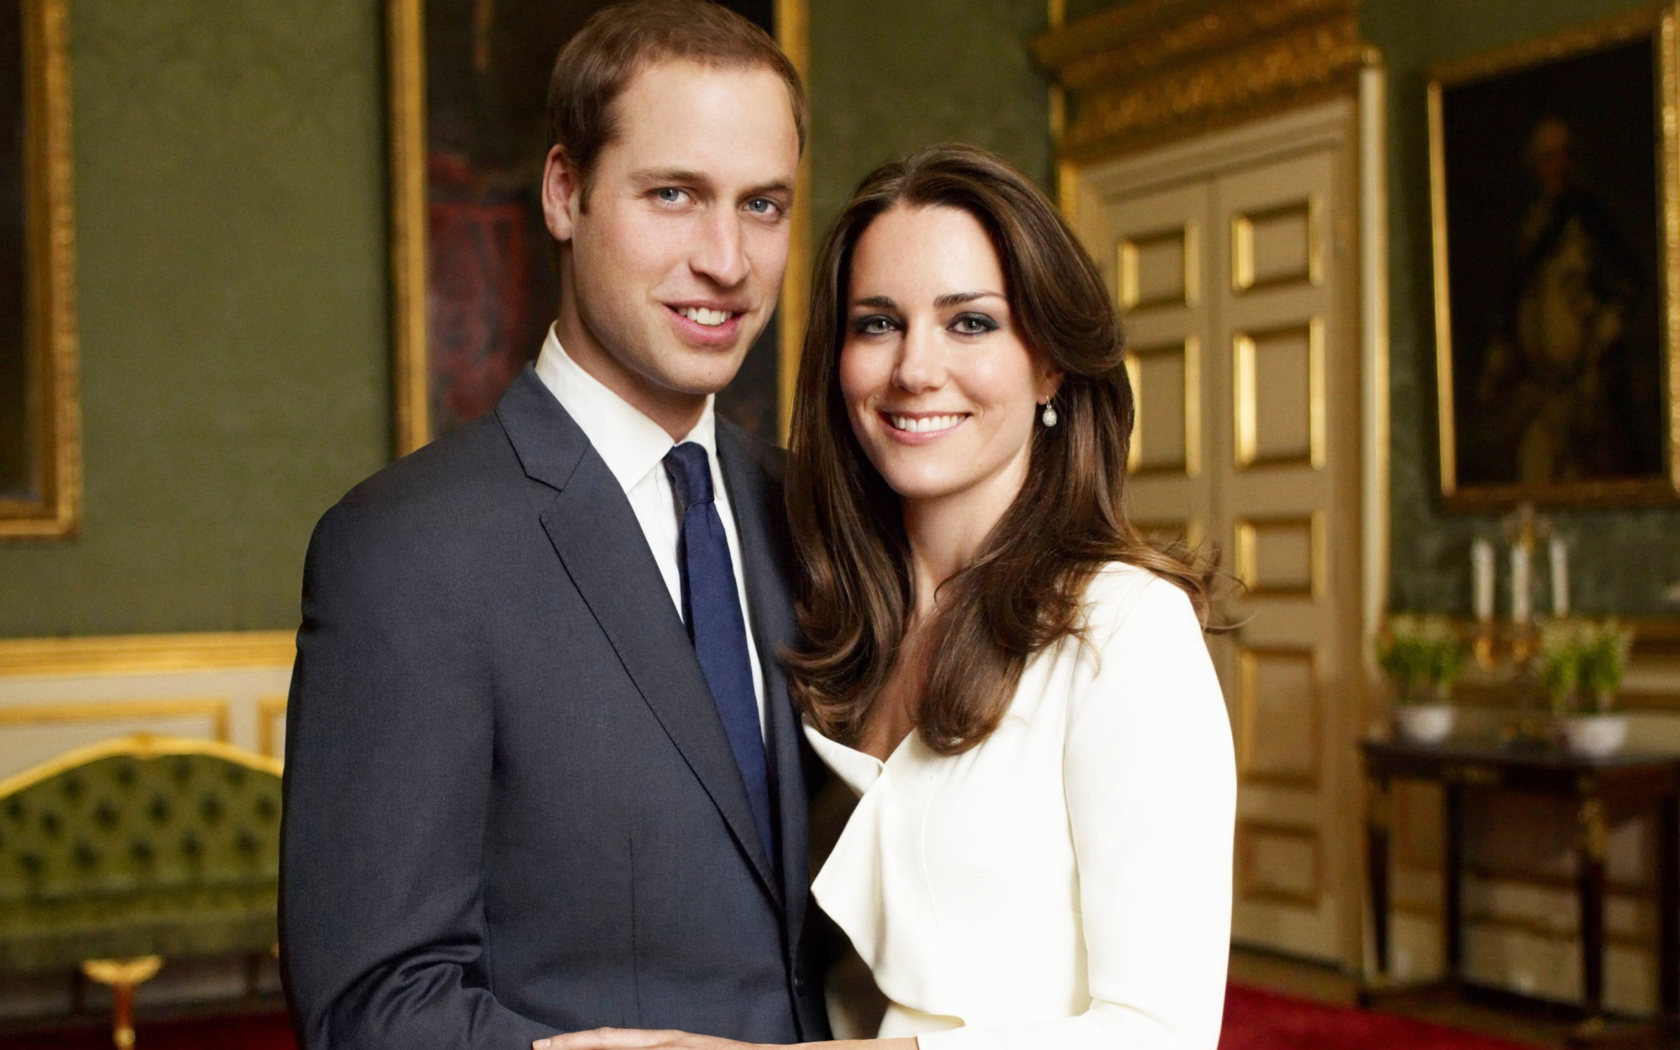 Prince William And Kate Middleton wallpaper 1680x1050